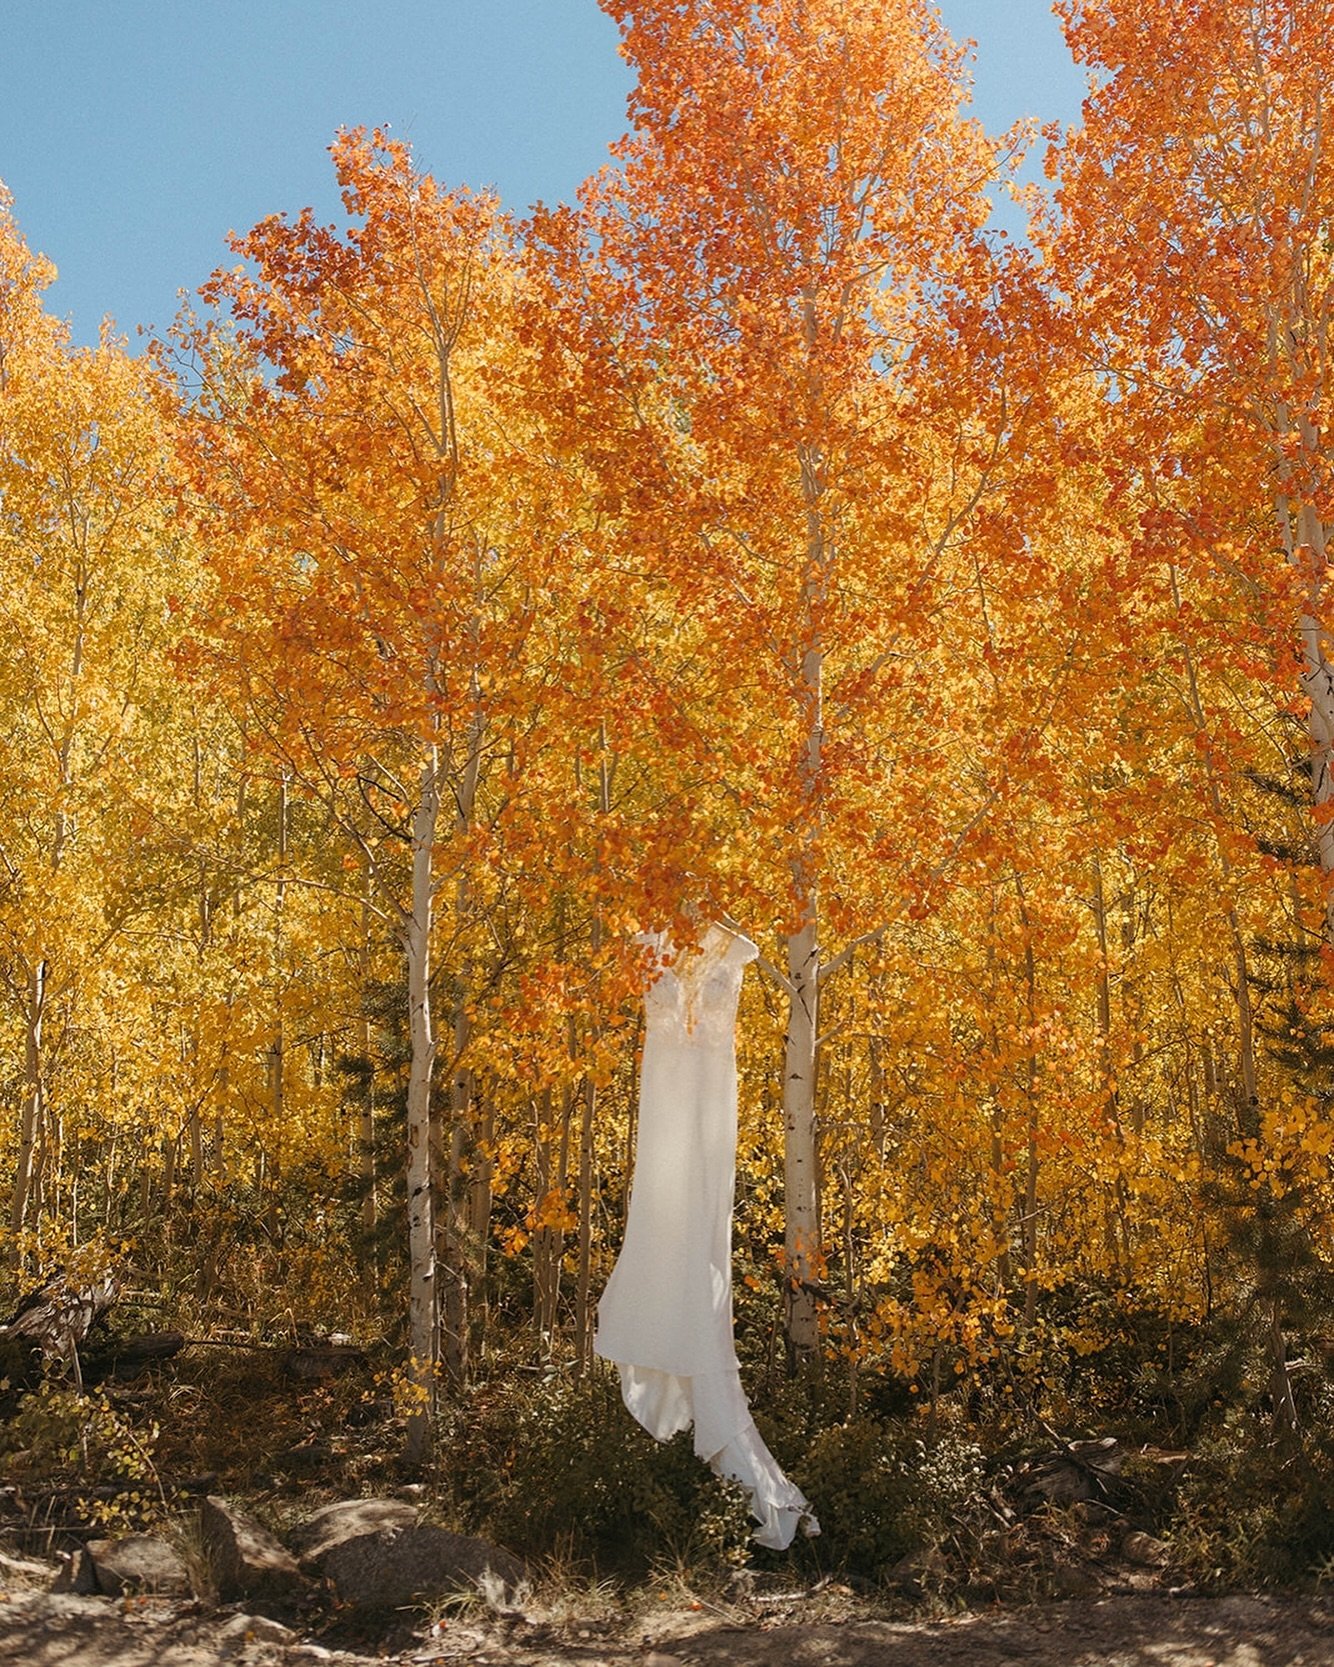 These fall colors will never get old. At Granby Ranch, all guests ride the chairlift to the top of the mountain for the ceremony. Once the lift got over the hill, there was an audible gasp as the guests saw the yellow, orange and red aspen grove for 